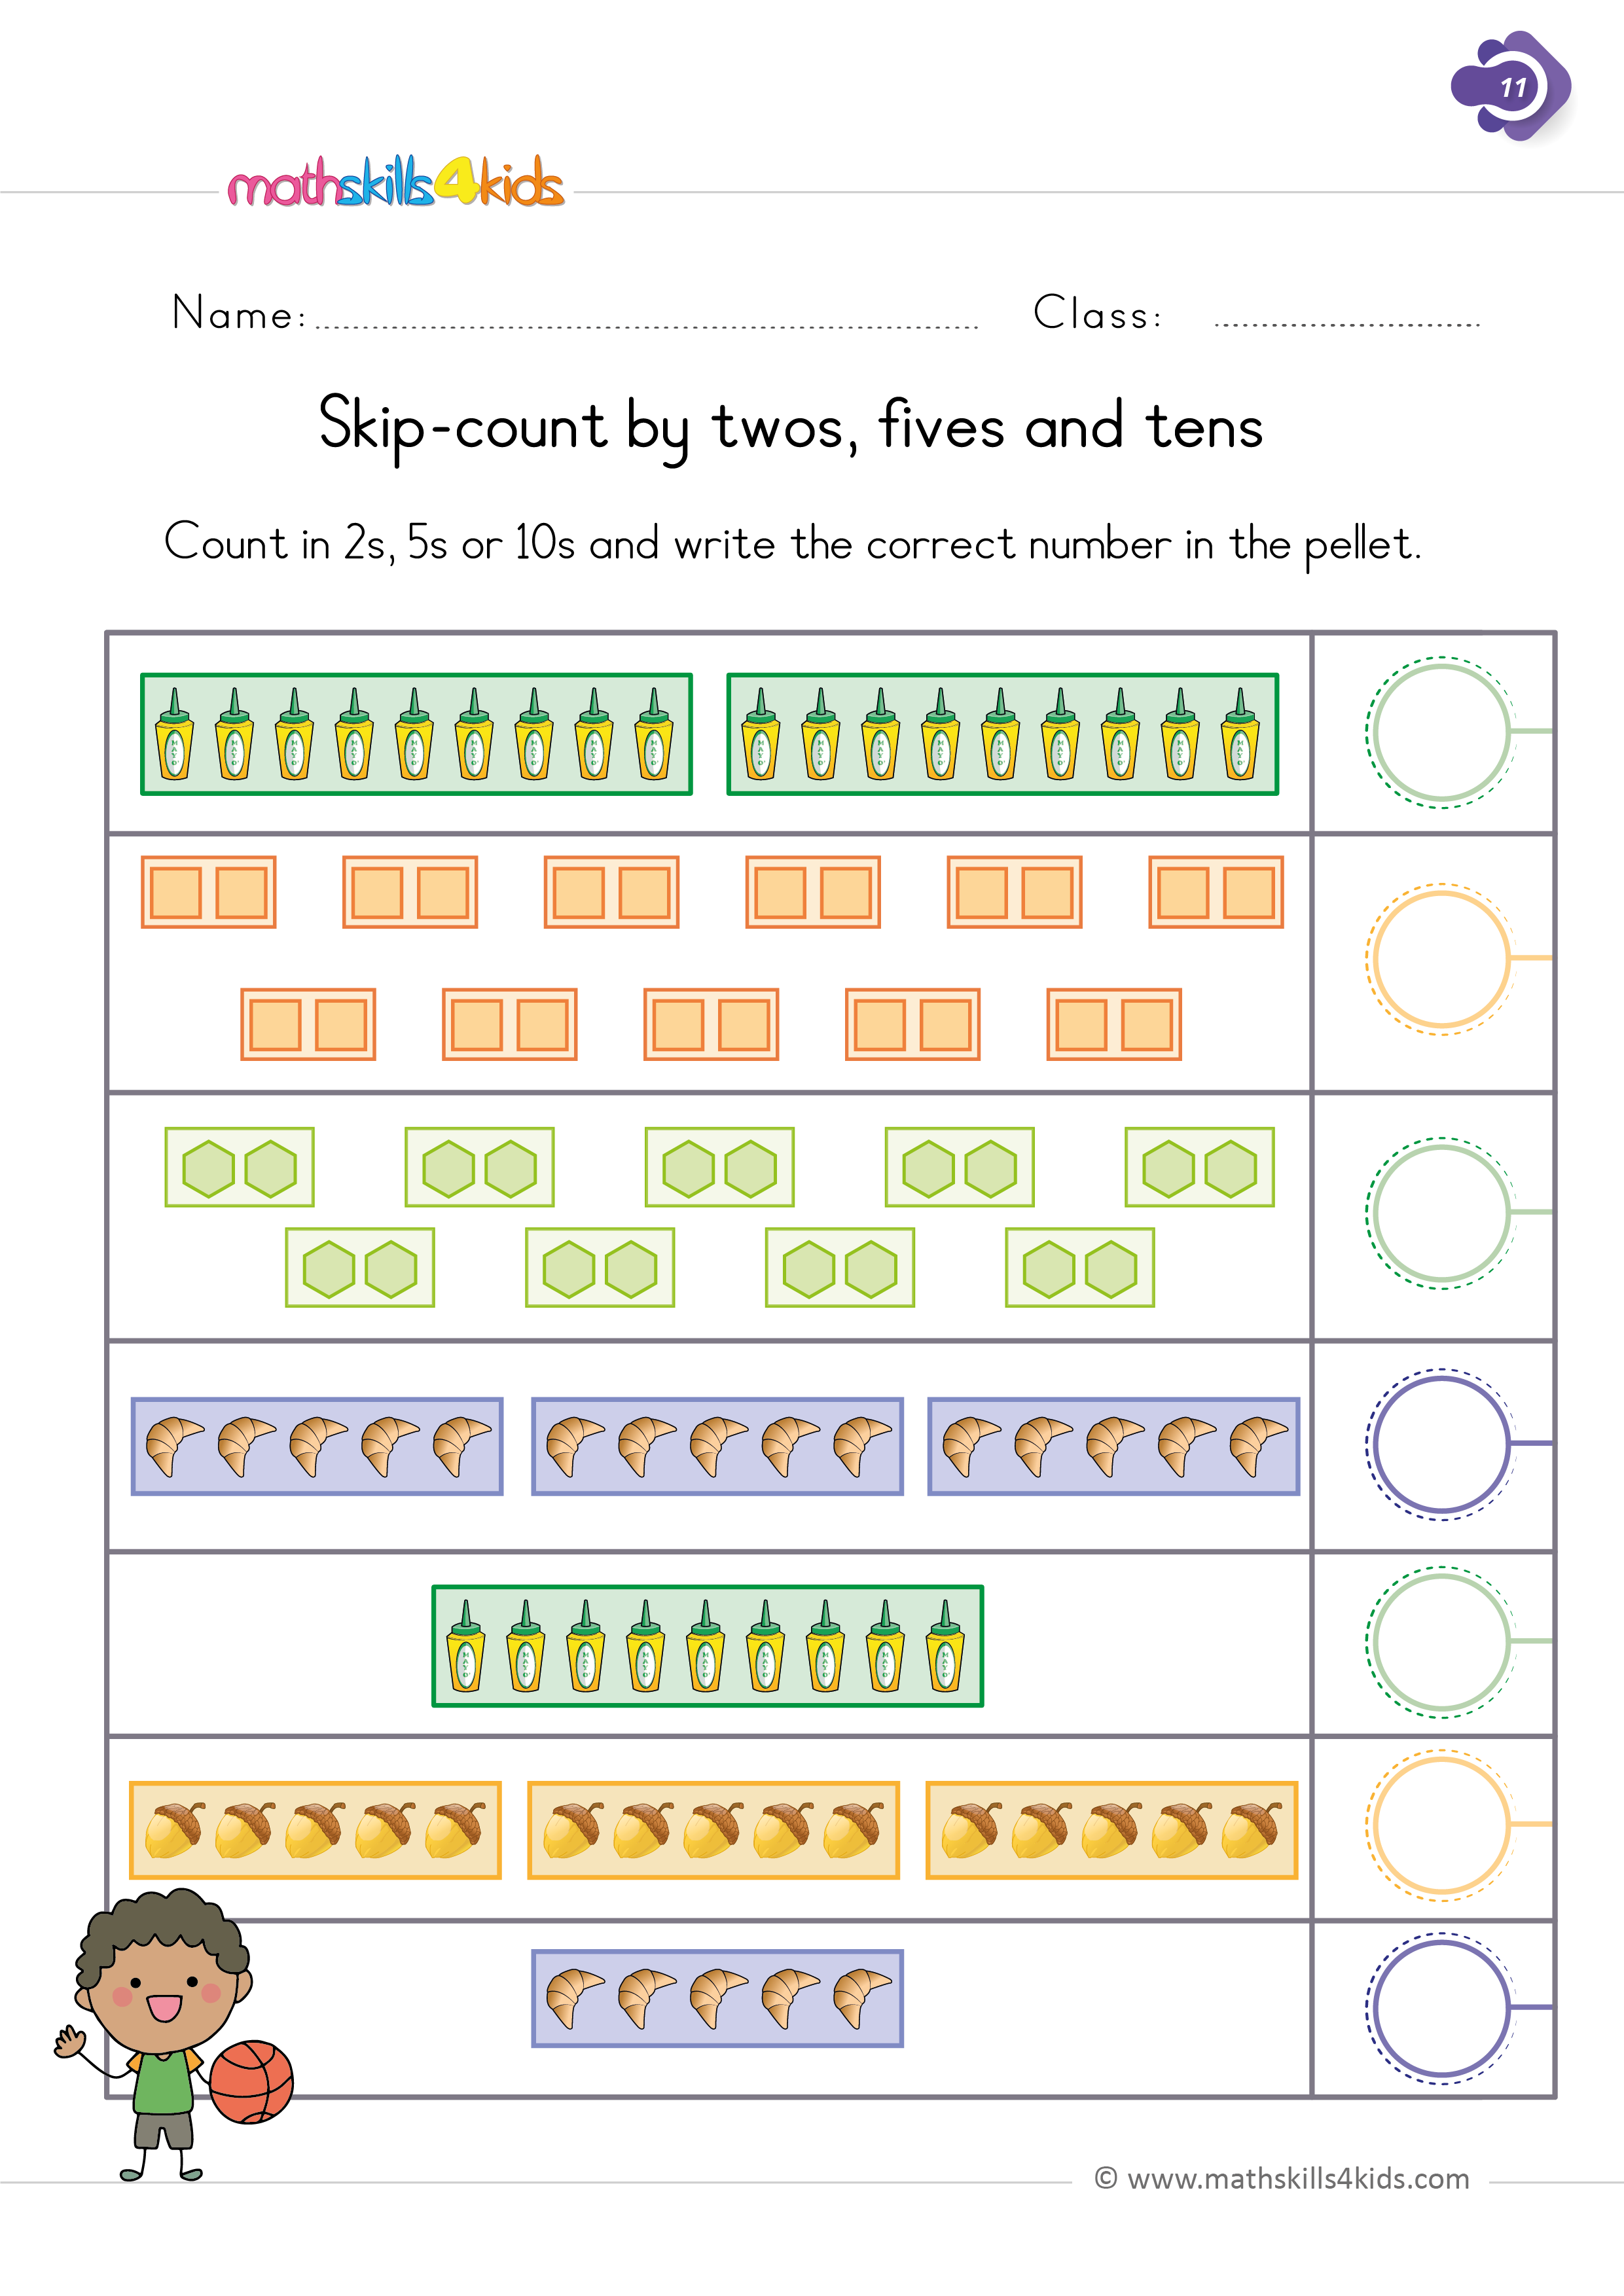 Best way to teach multiplication facts - Counting by 10's